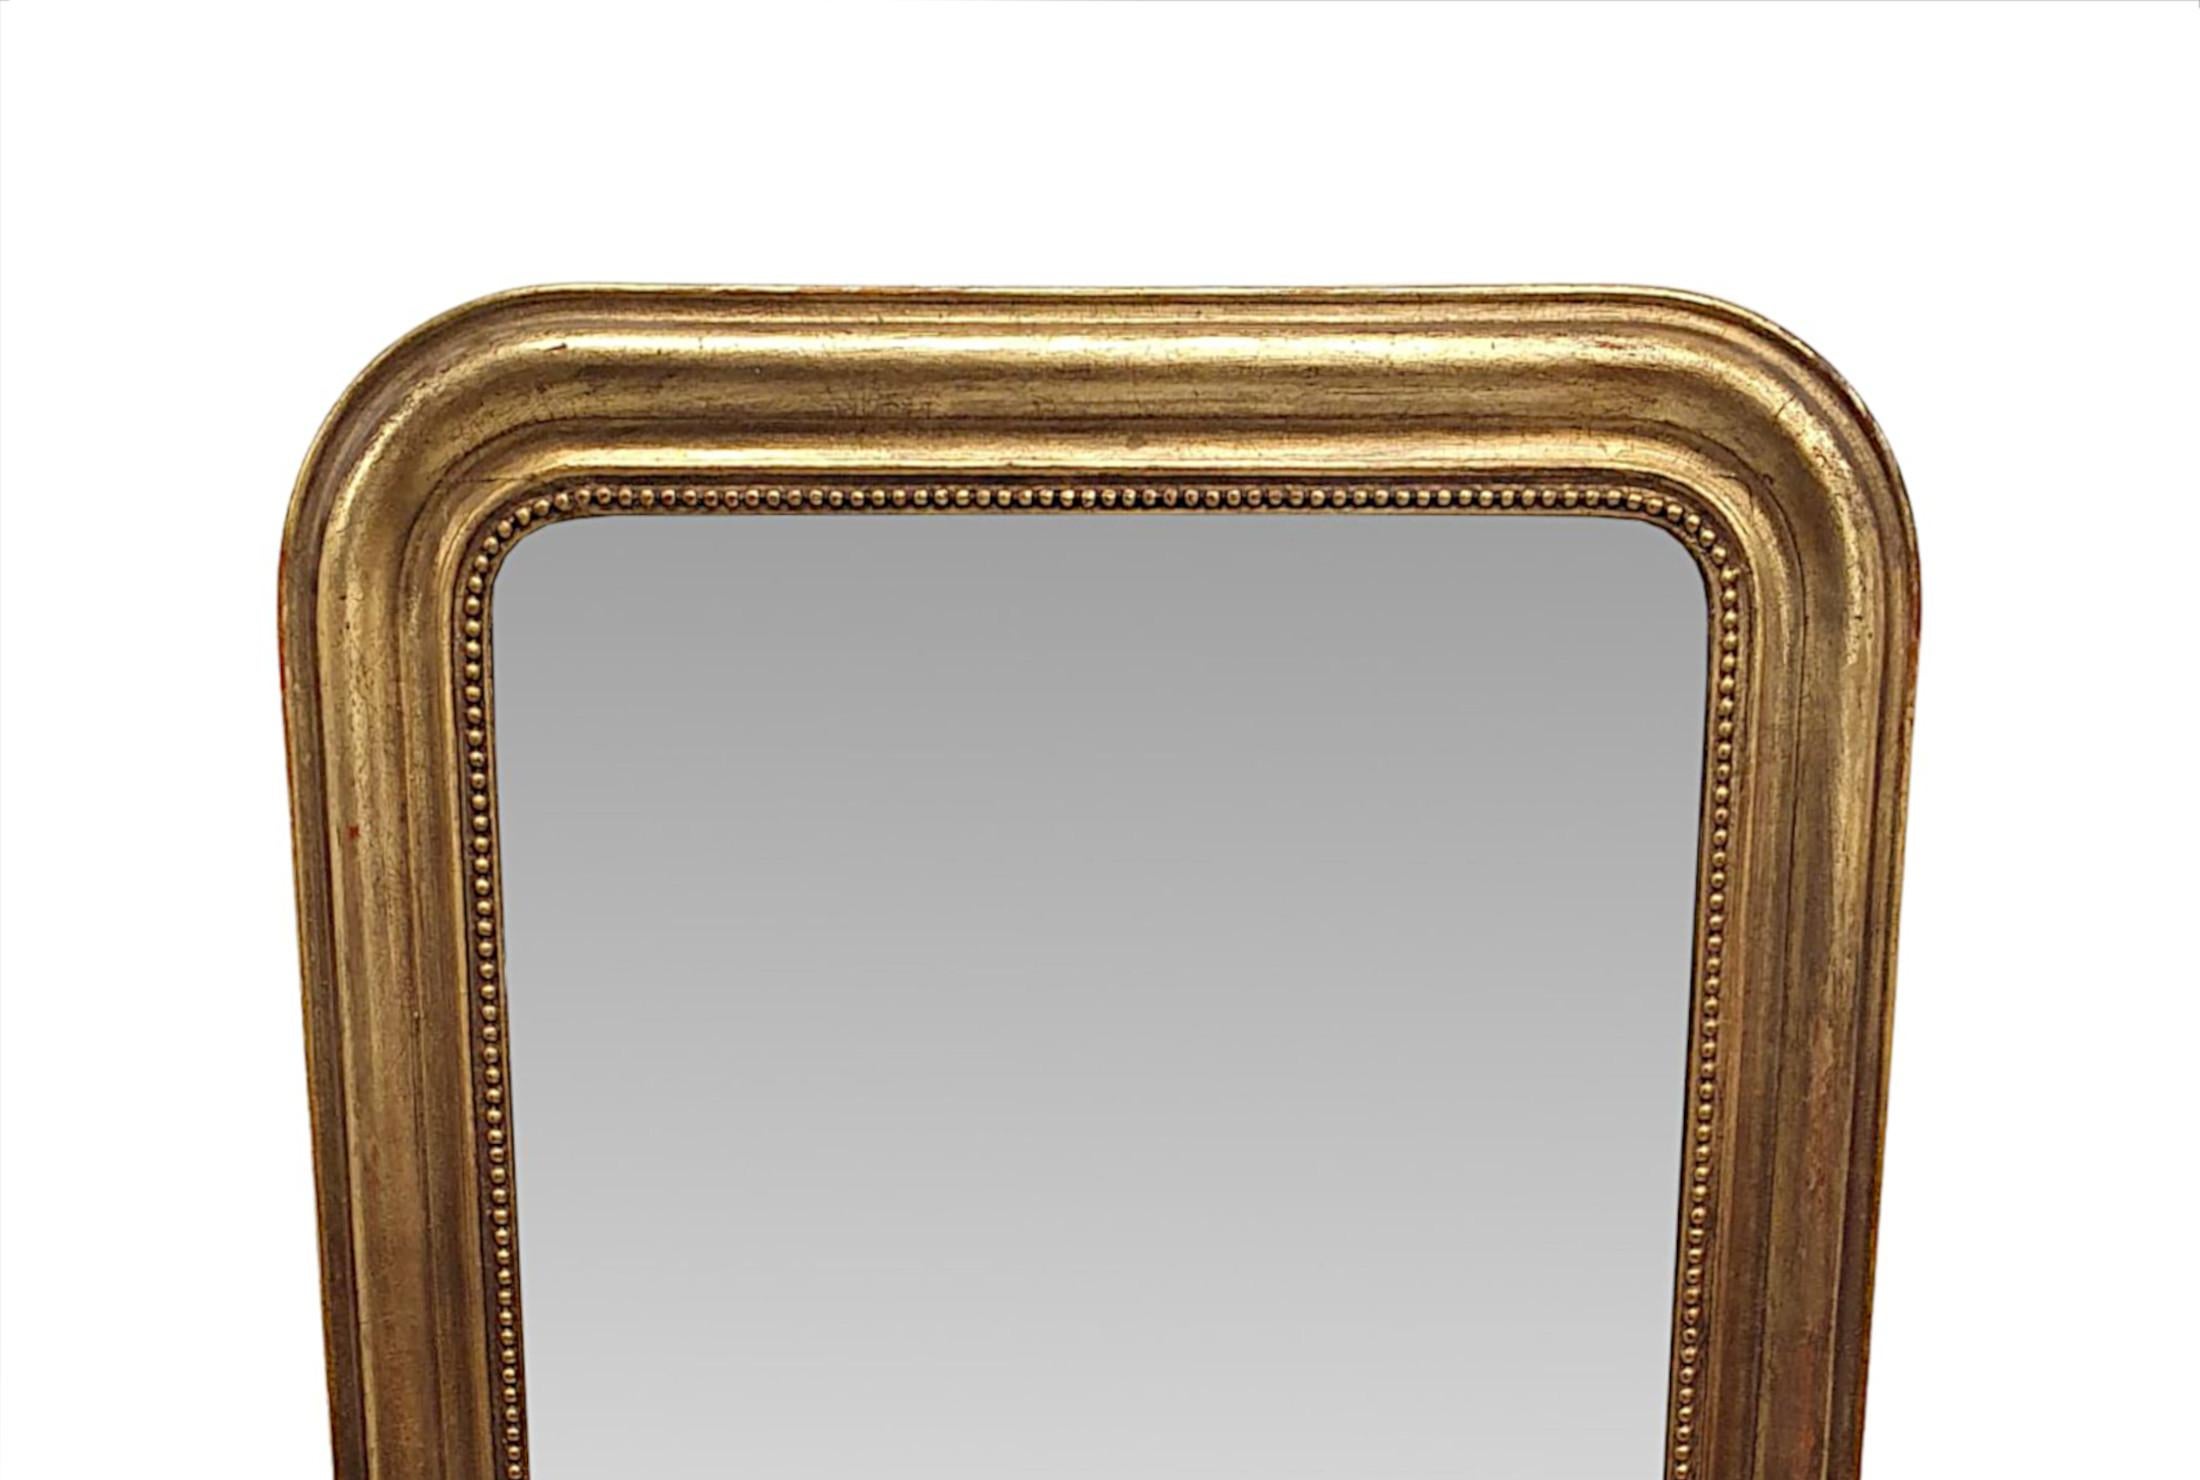 A lovely 19th century giltwood hall or bathroom mirror of fabulous quality and neat proportions. The mirror glass plate of rectangular form is set within a finely hand carved moulded and fluted giltwood frame with elegantly simple beaded border